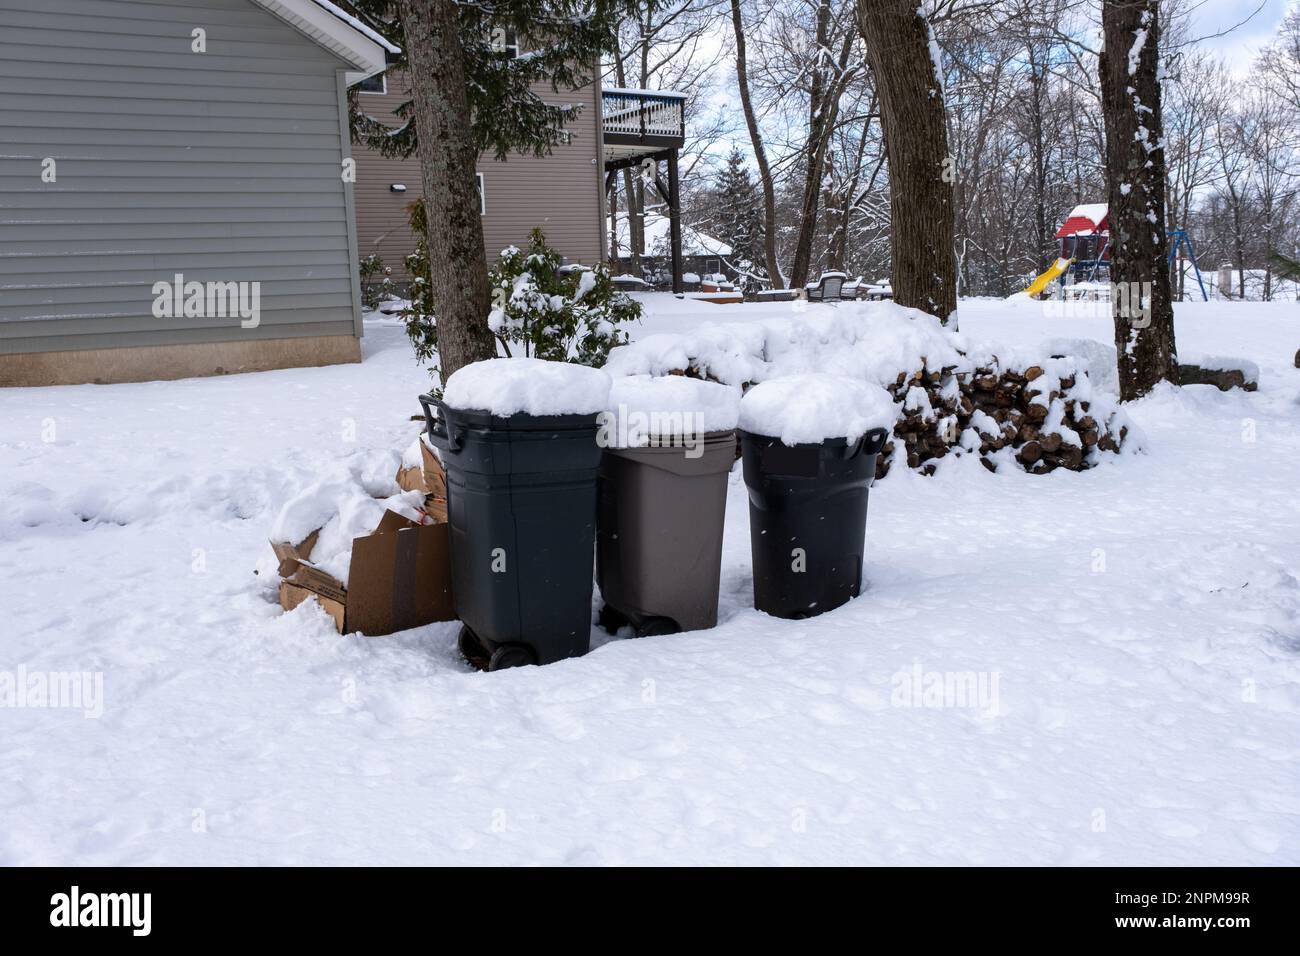 https://c8.alamy.com/comp/2NPM99R/trash-cans-and-woodpile-covered-with-snow-in-winter-2NPM99R.jpg